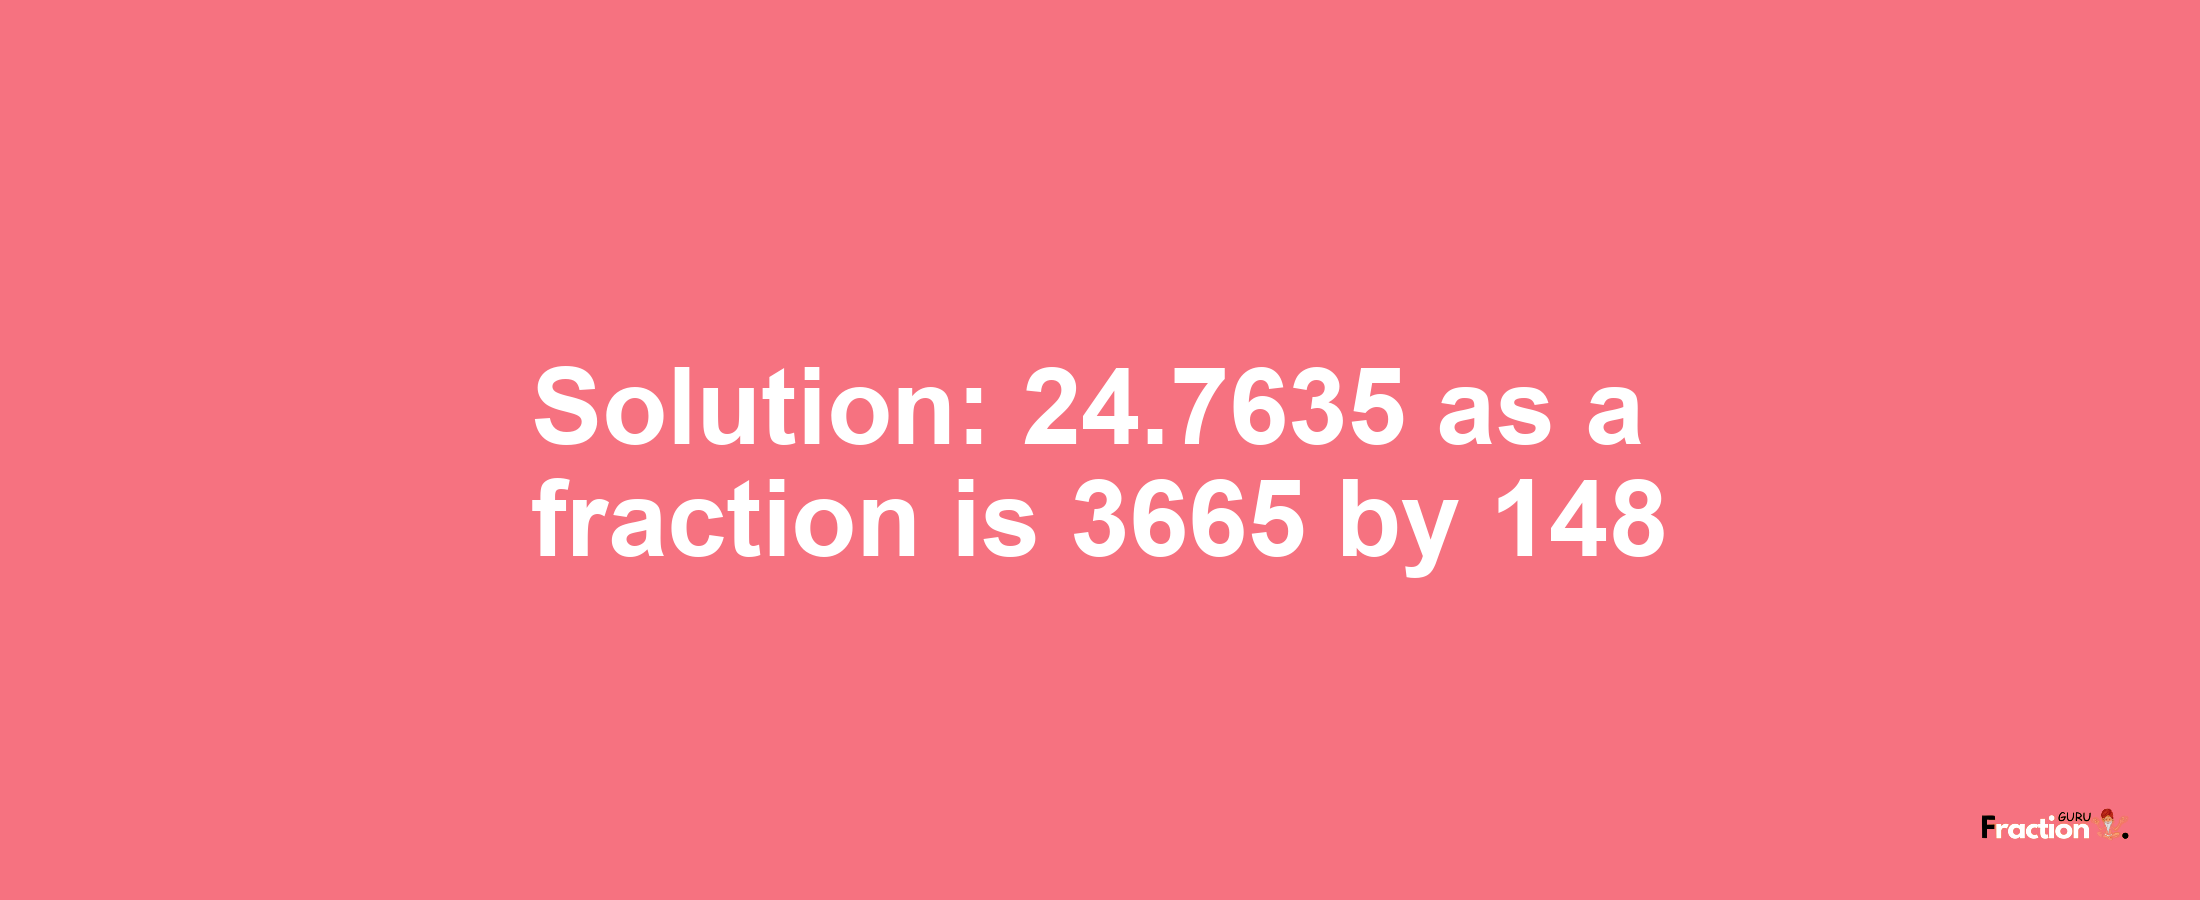 Solution:24.7635 as a fraction is 3665/148